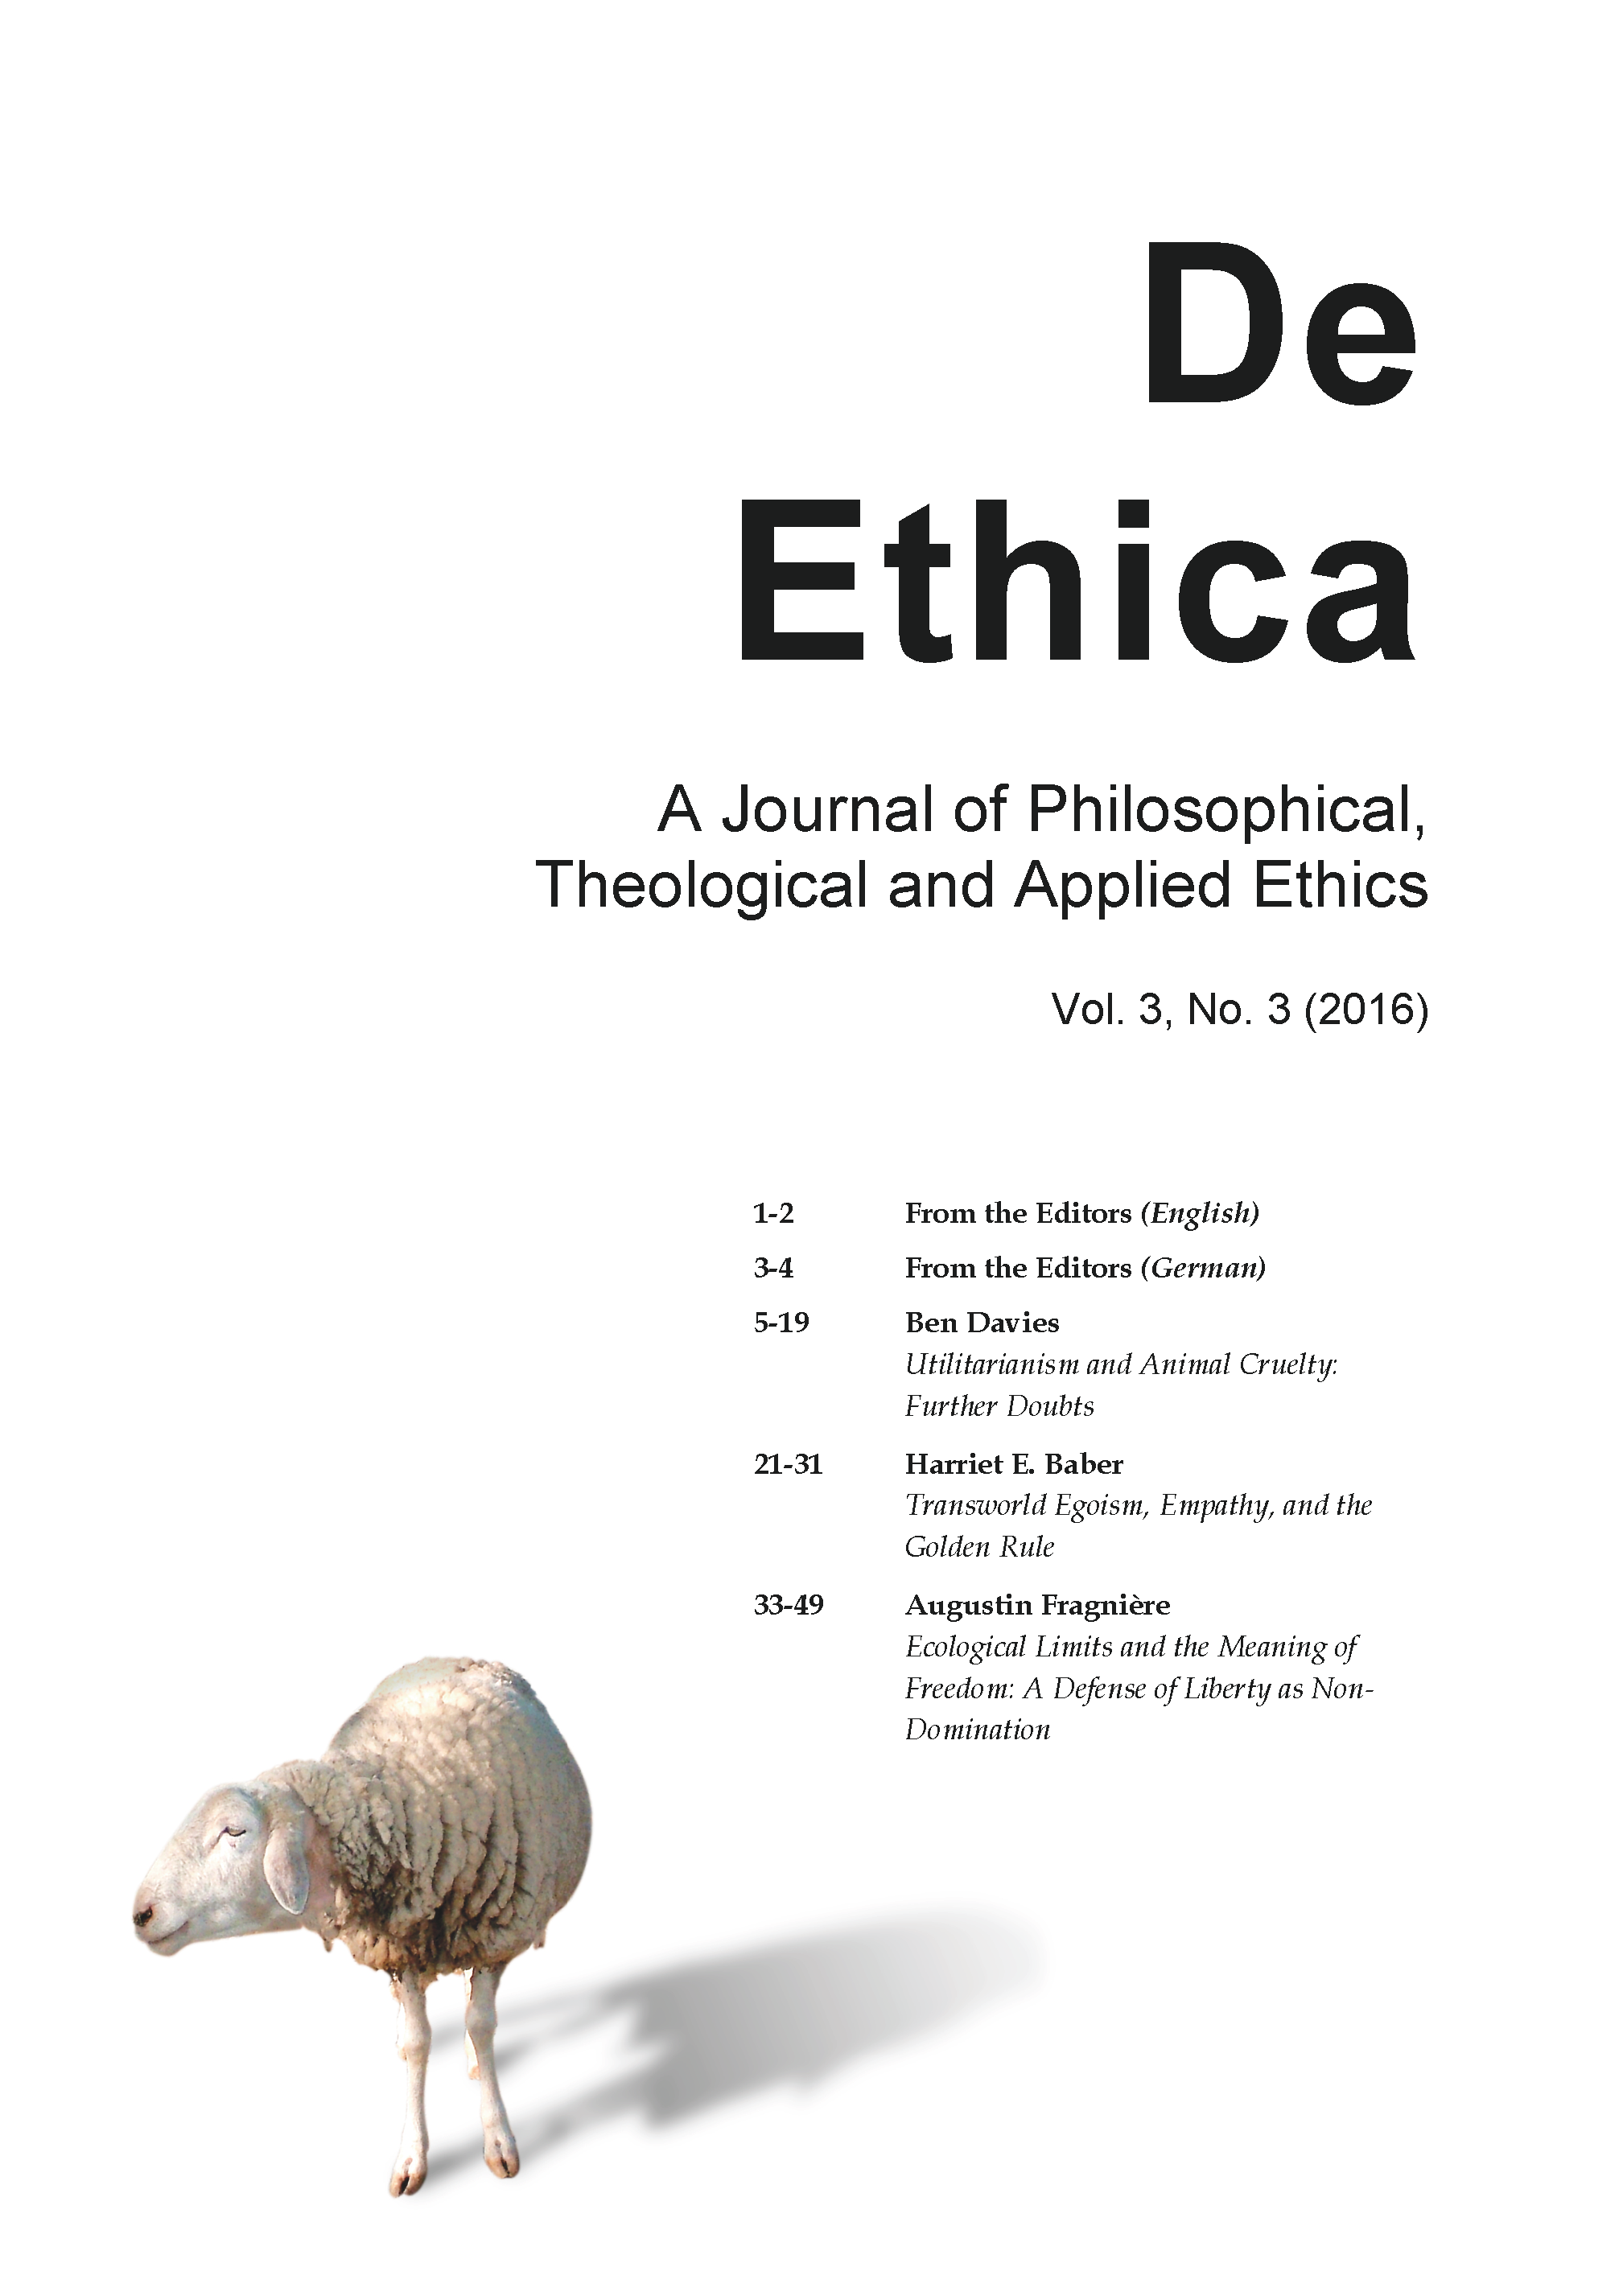 Utilitarianism and Animal Cruelty: Further Doubts | De Ethica